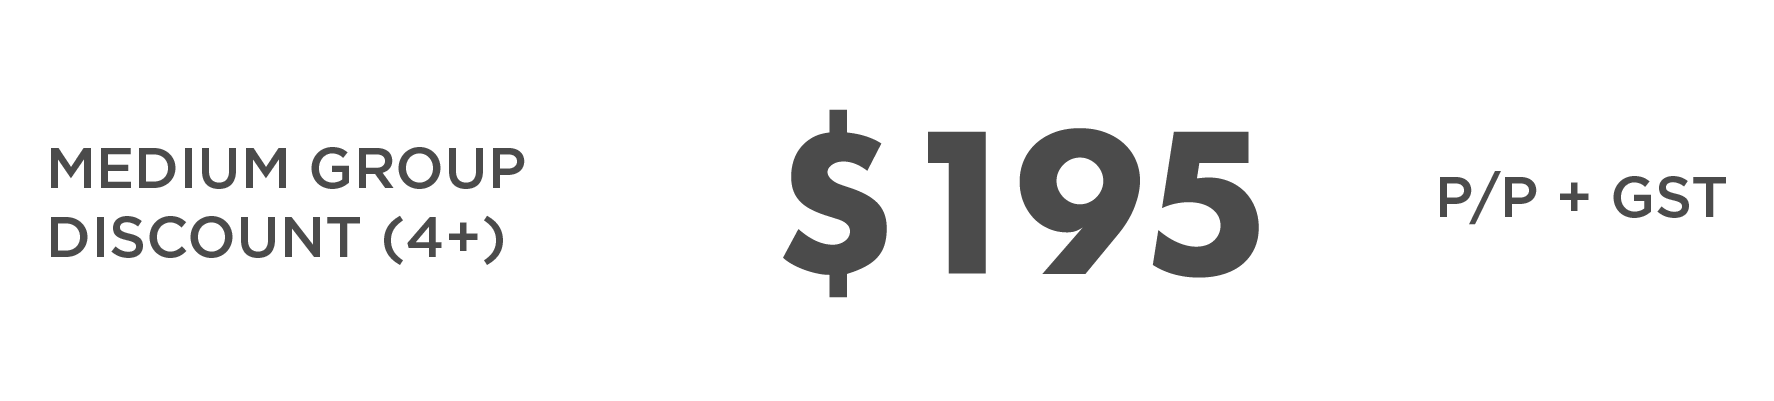 pricing-04.png